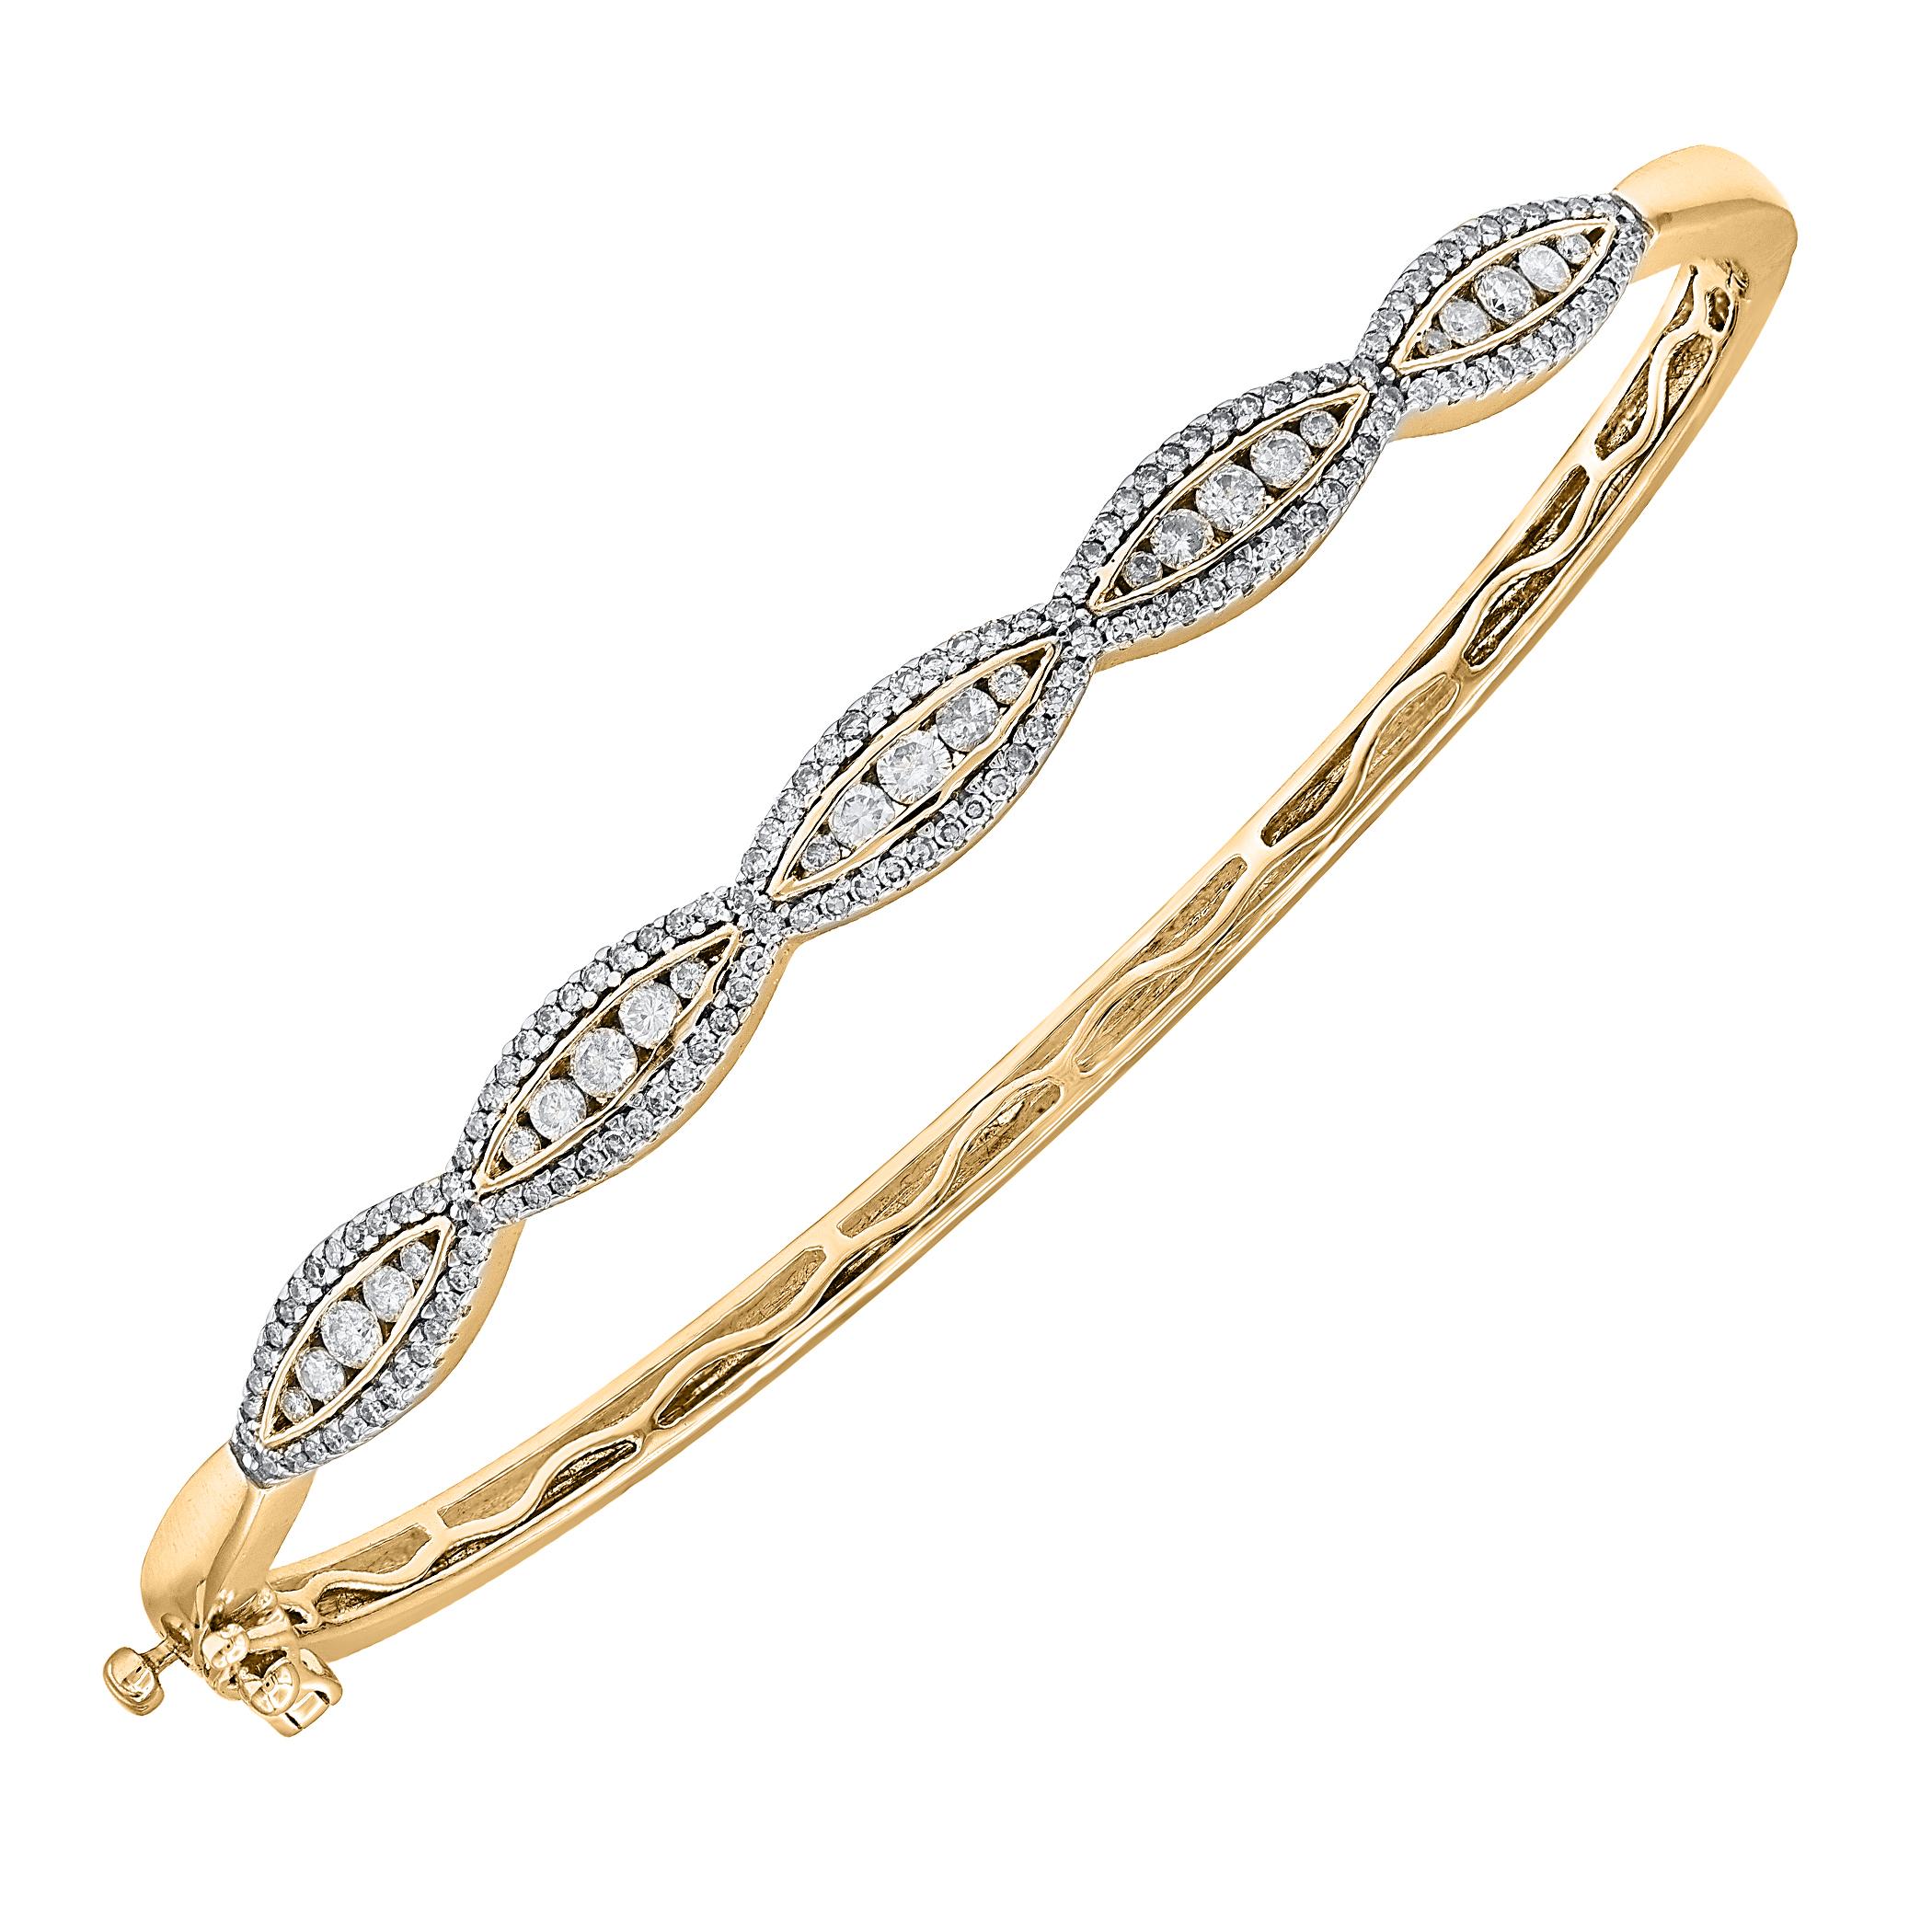 Simple and sparkling, this diamond bangle elevates any attire. Expertly handcrafted by our inhouse experts in 14 karat yellow gold and studded with 157 round brilliant and single cut natural diamond set in prong and channel setting. The total